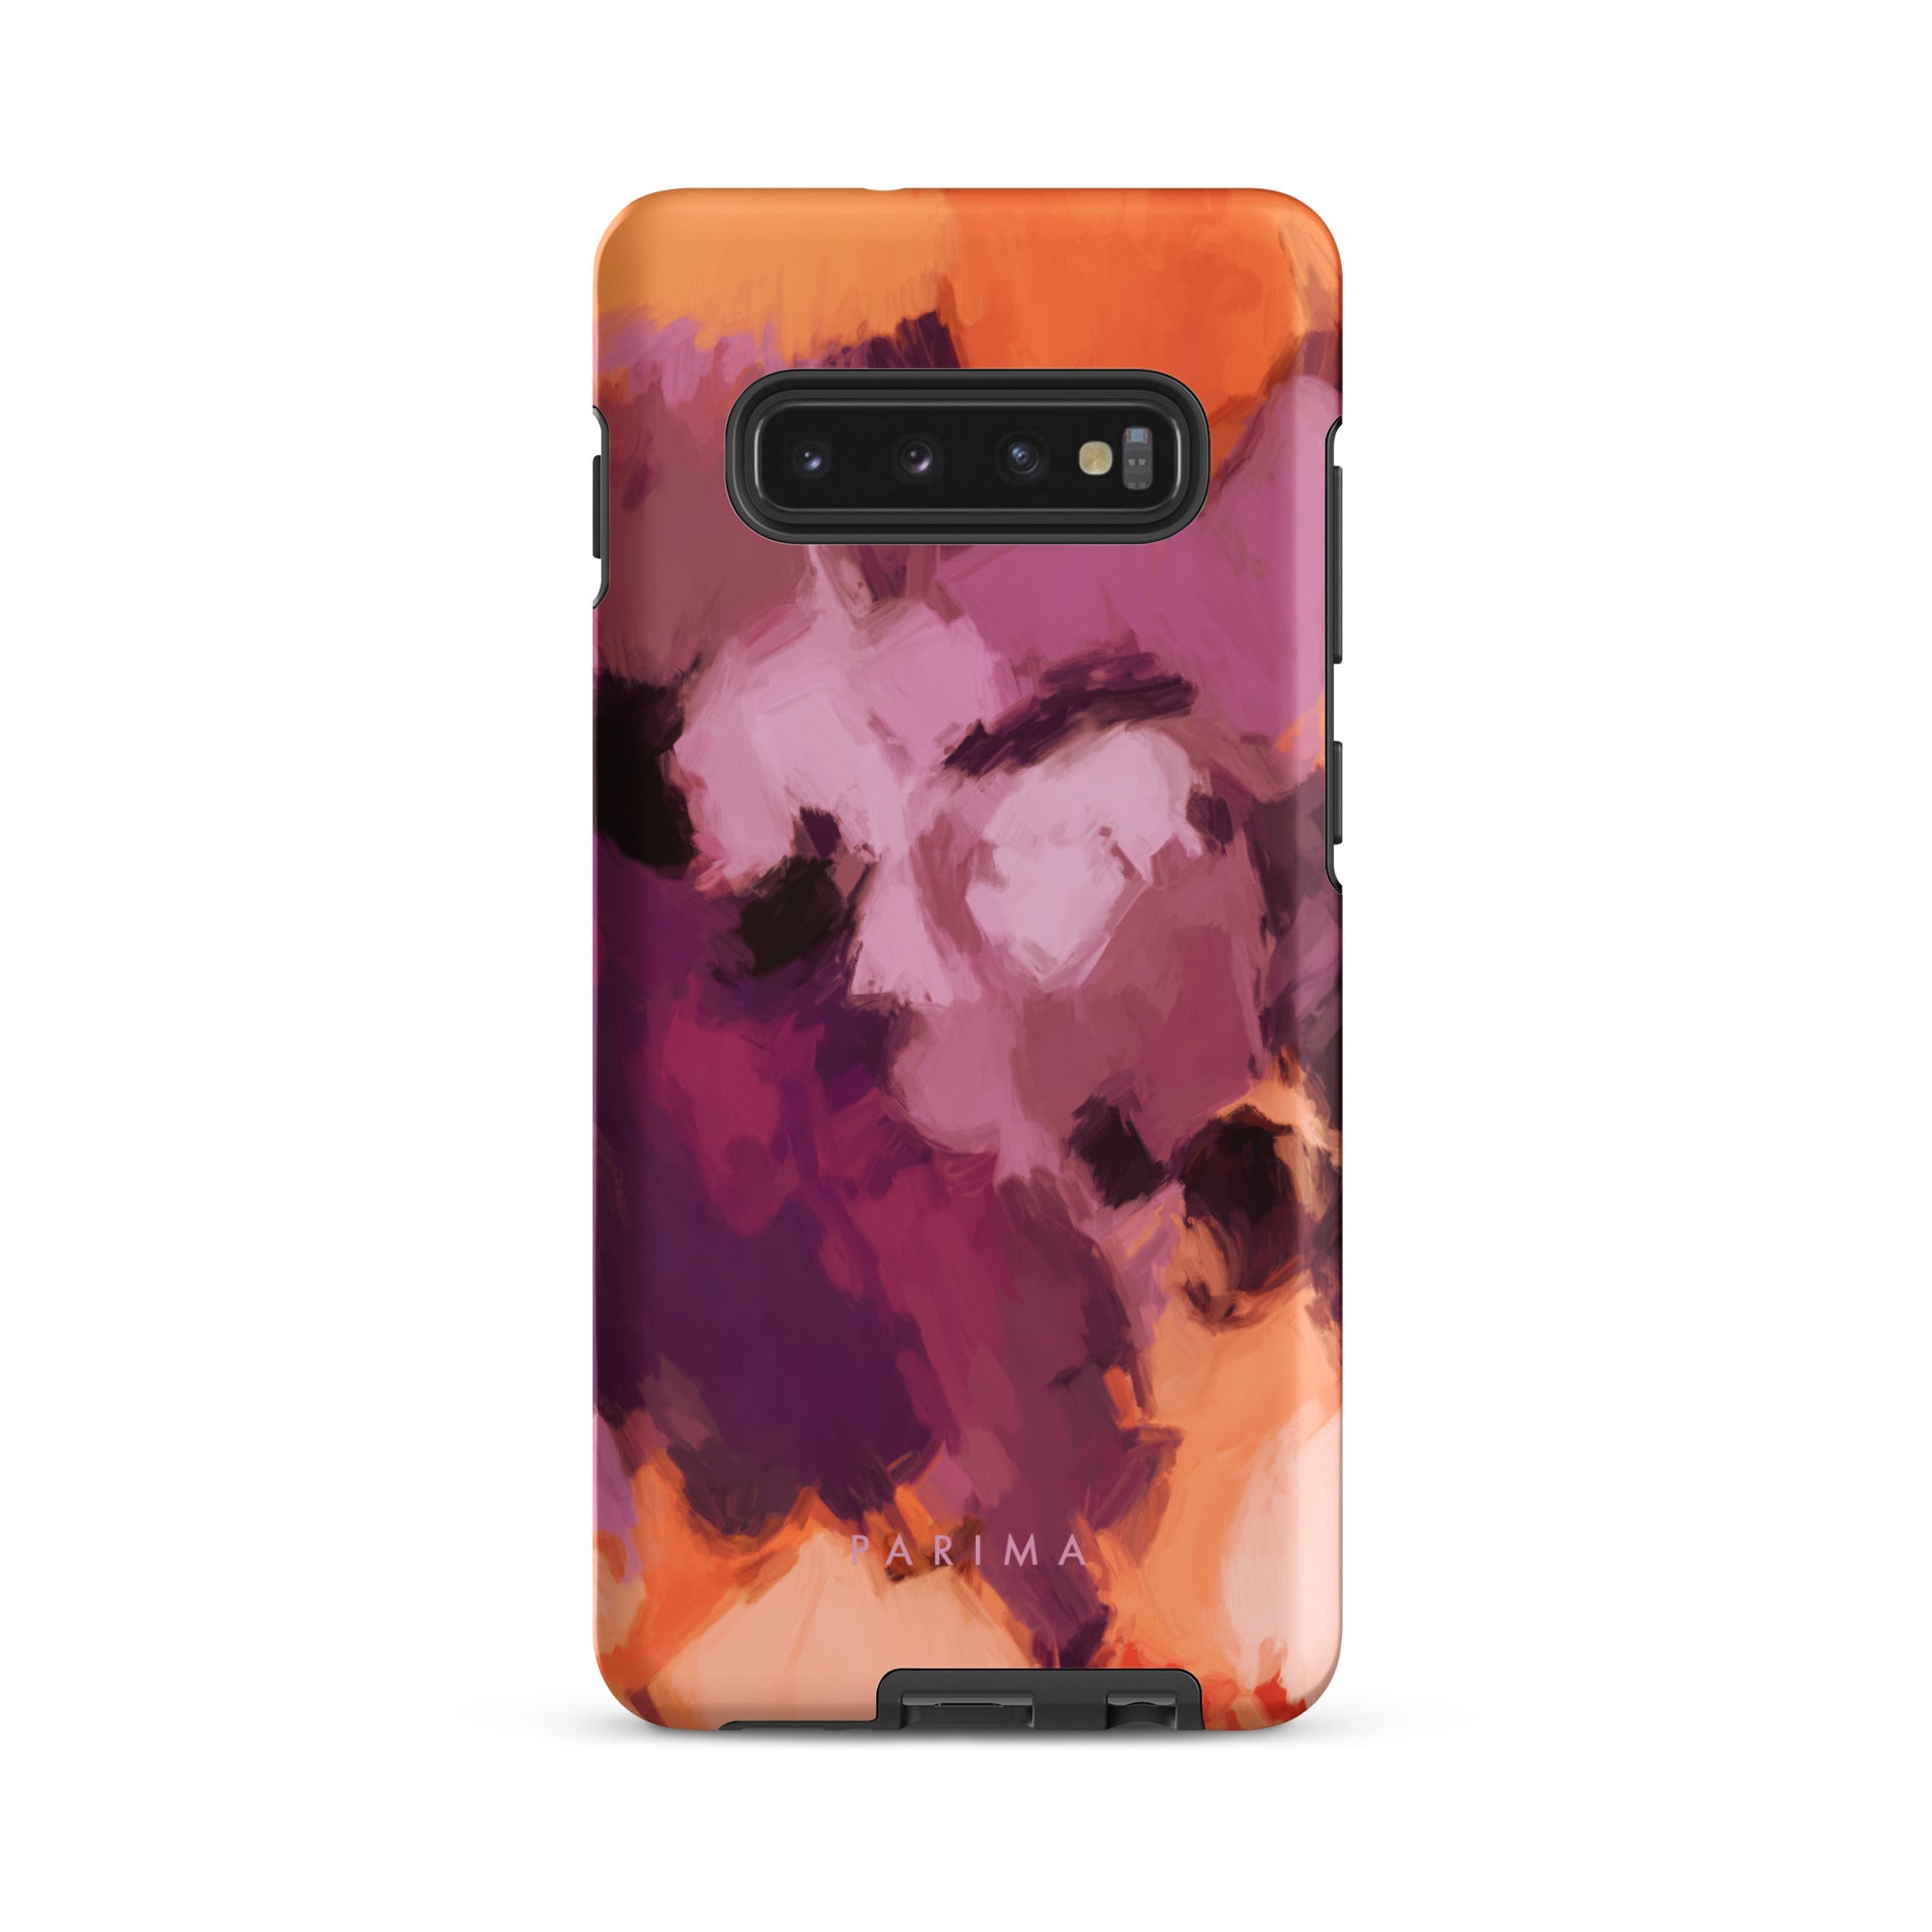 Lilac, purple and orange abstract art on Samsung Galaxy S10 Plus tough case by Parima Studio